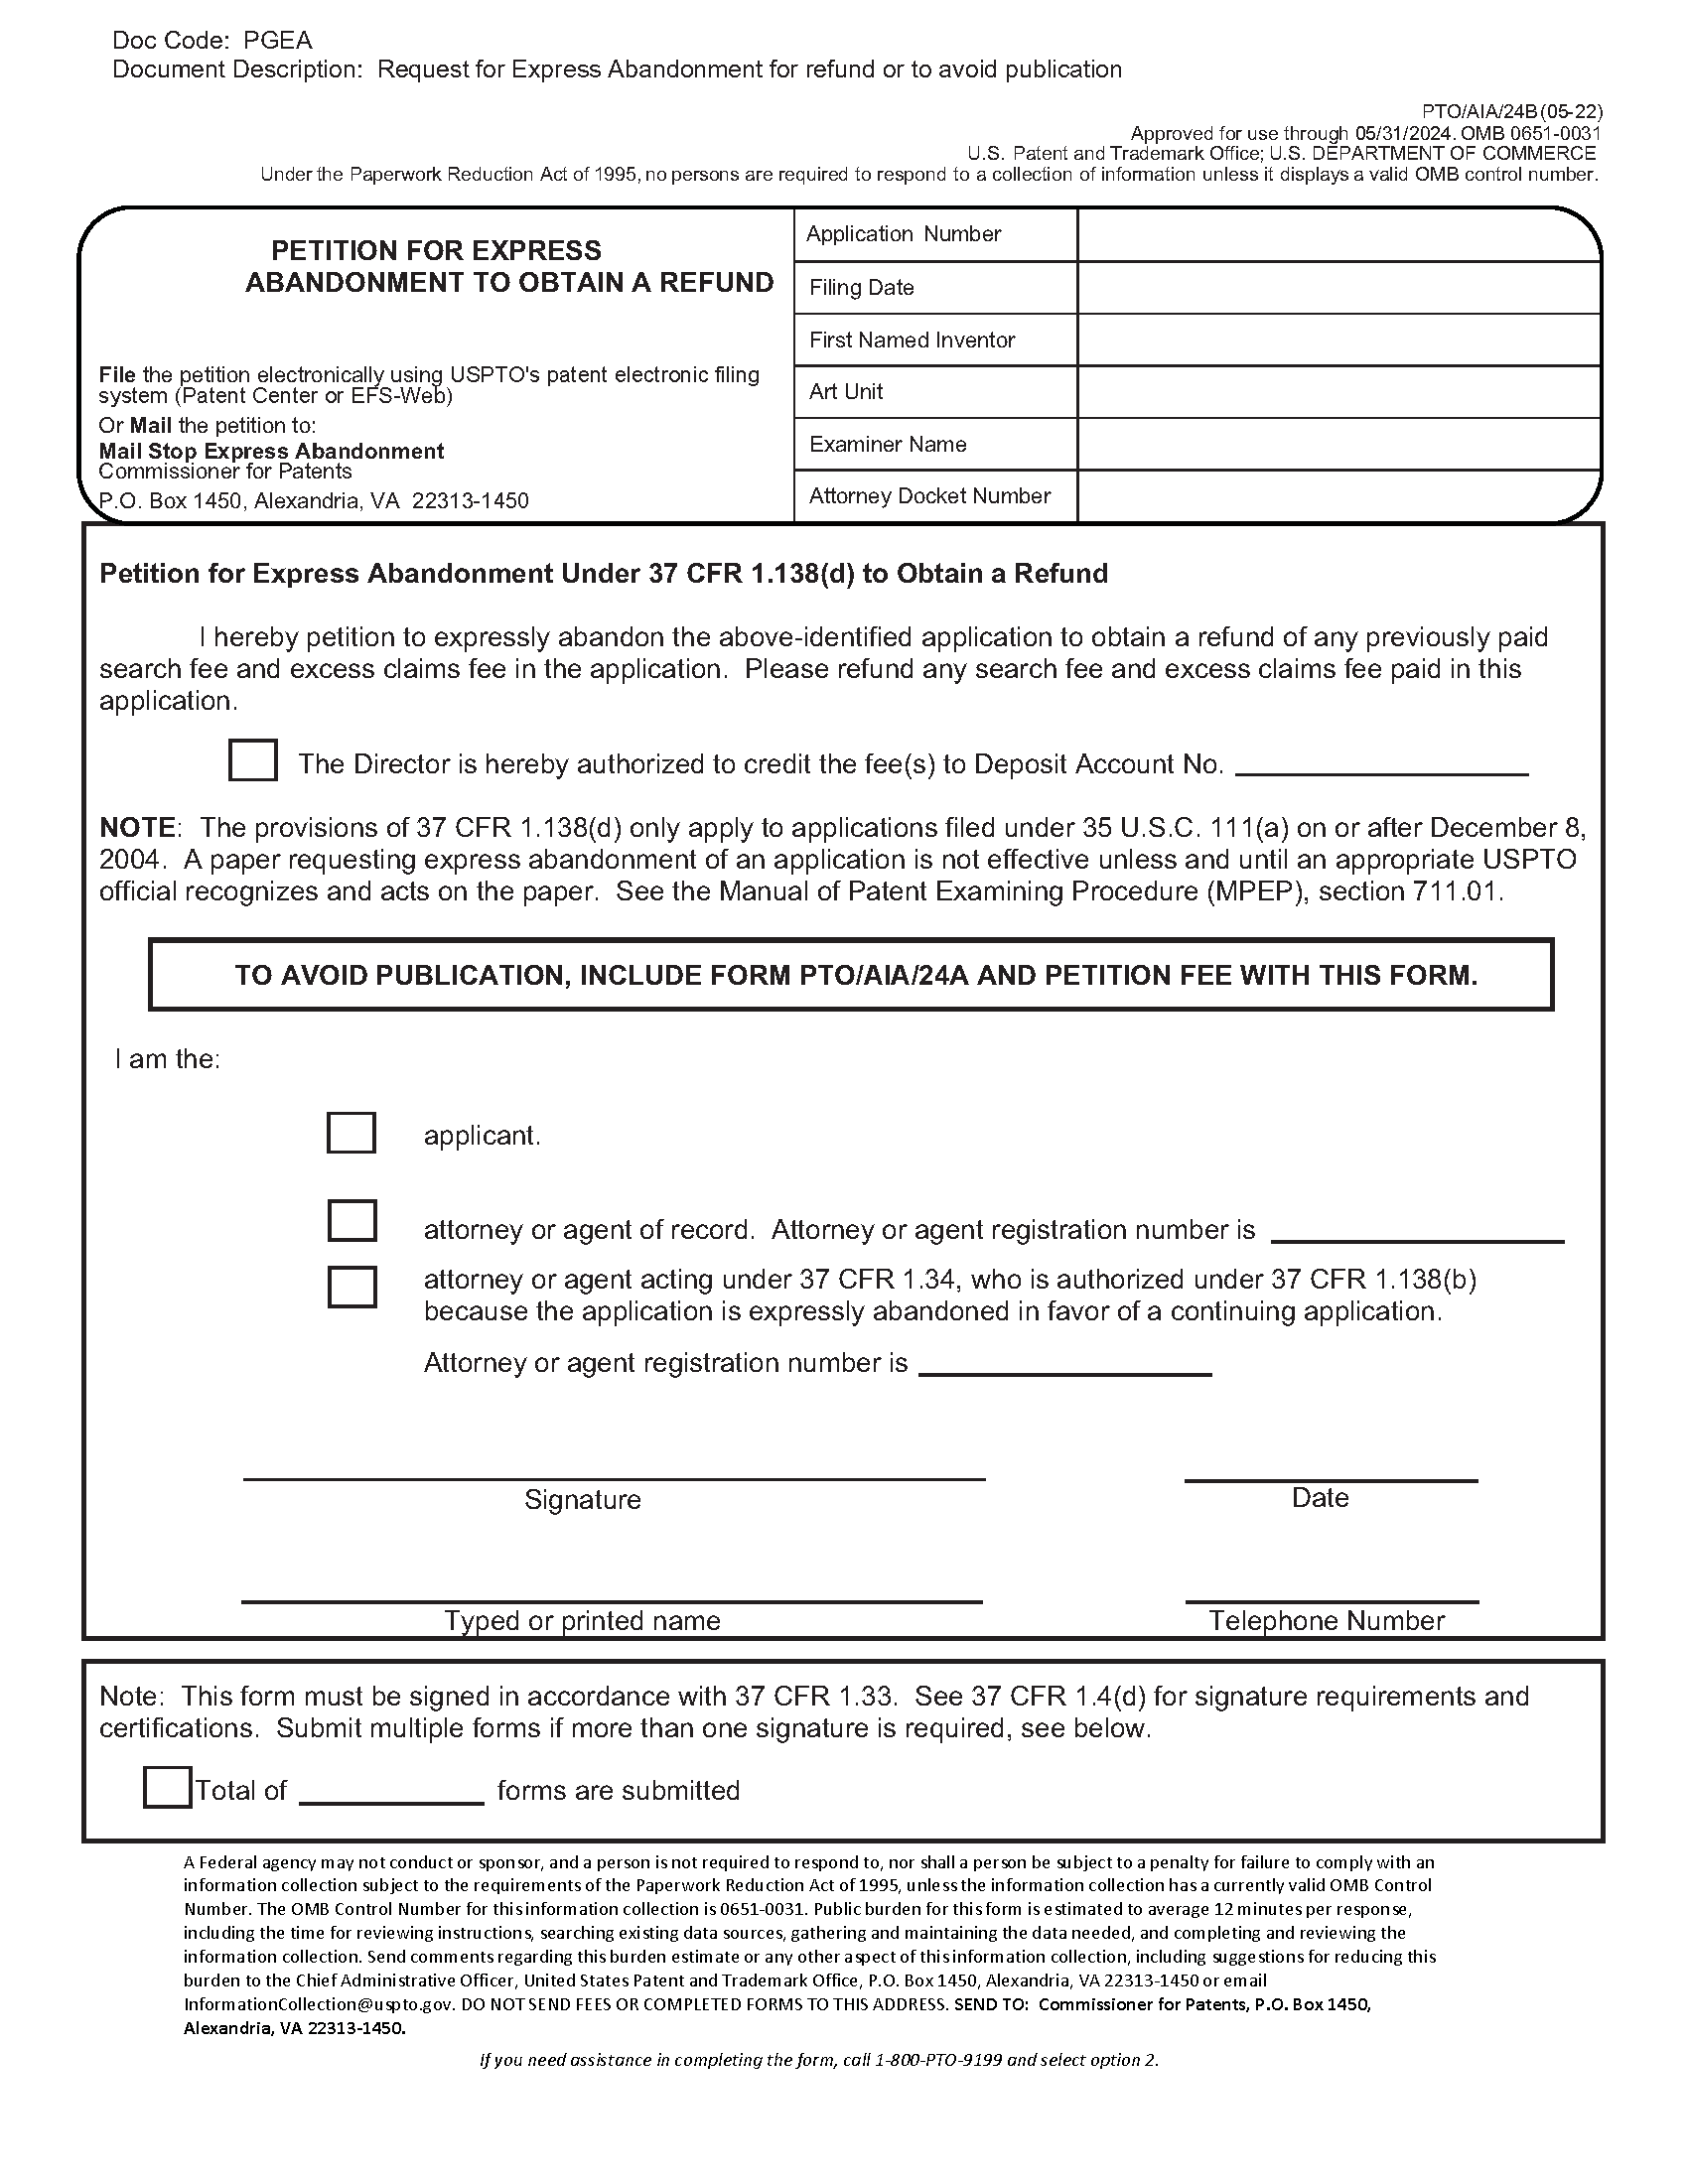 Form PTO/SB/24B Petition for Express Abandonment To Obtain a Refund